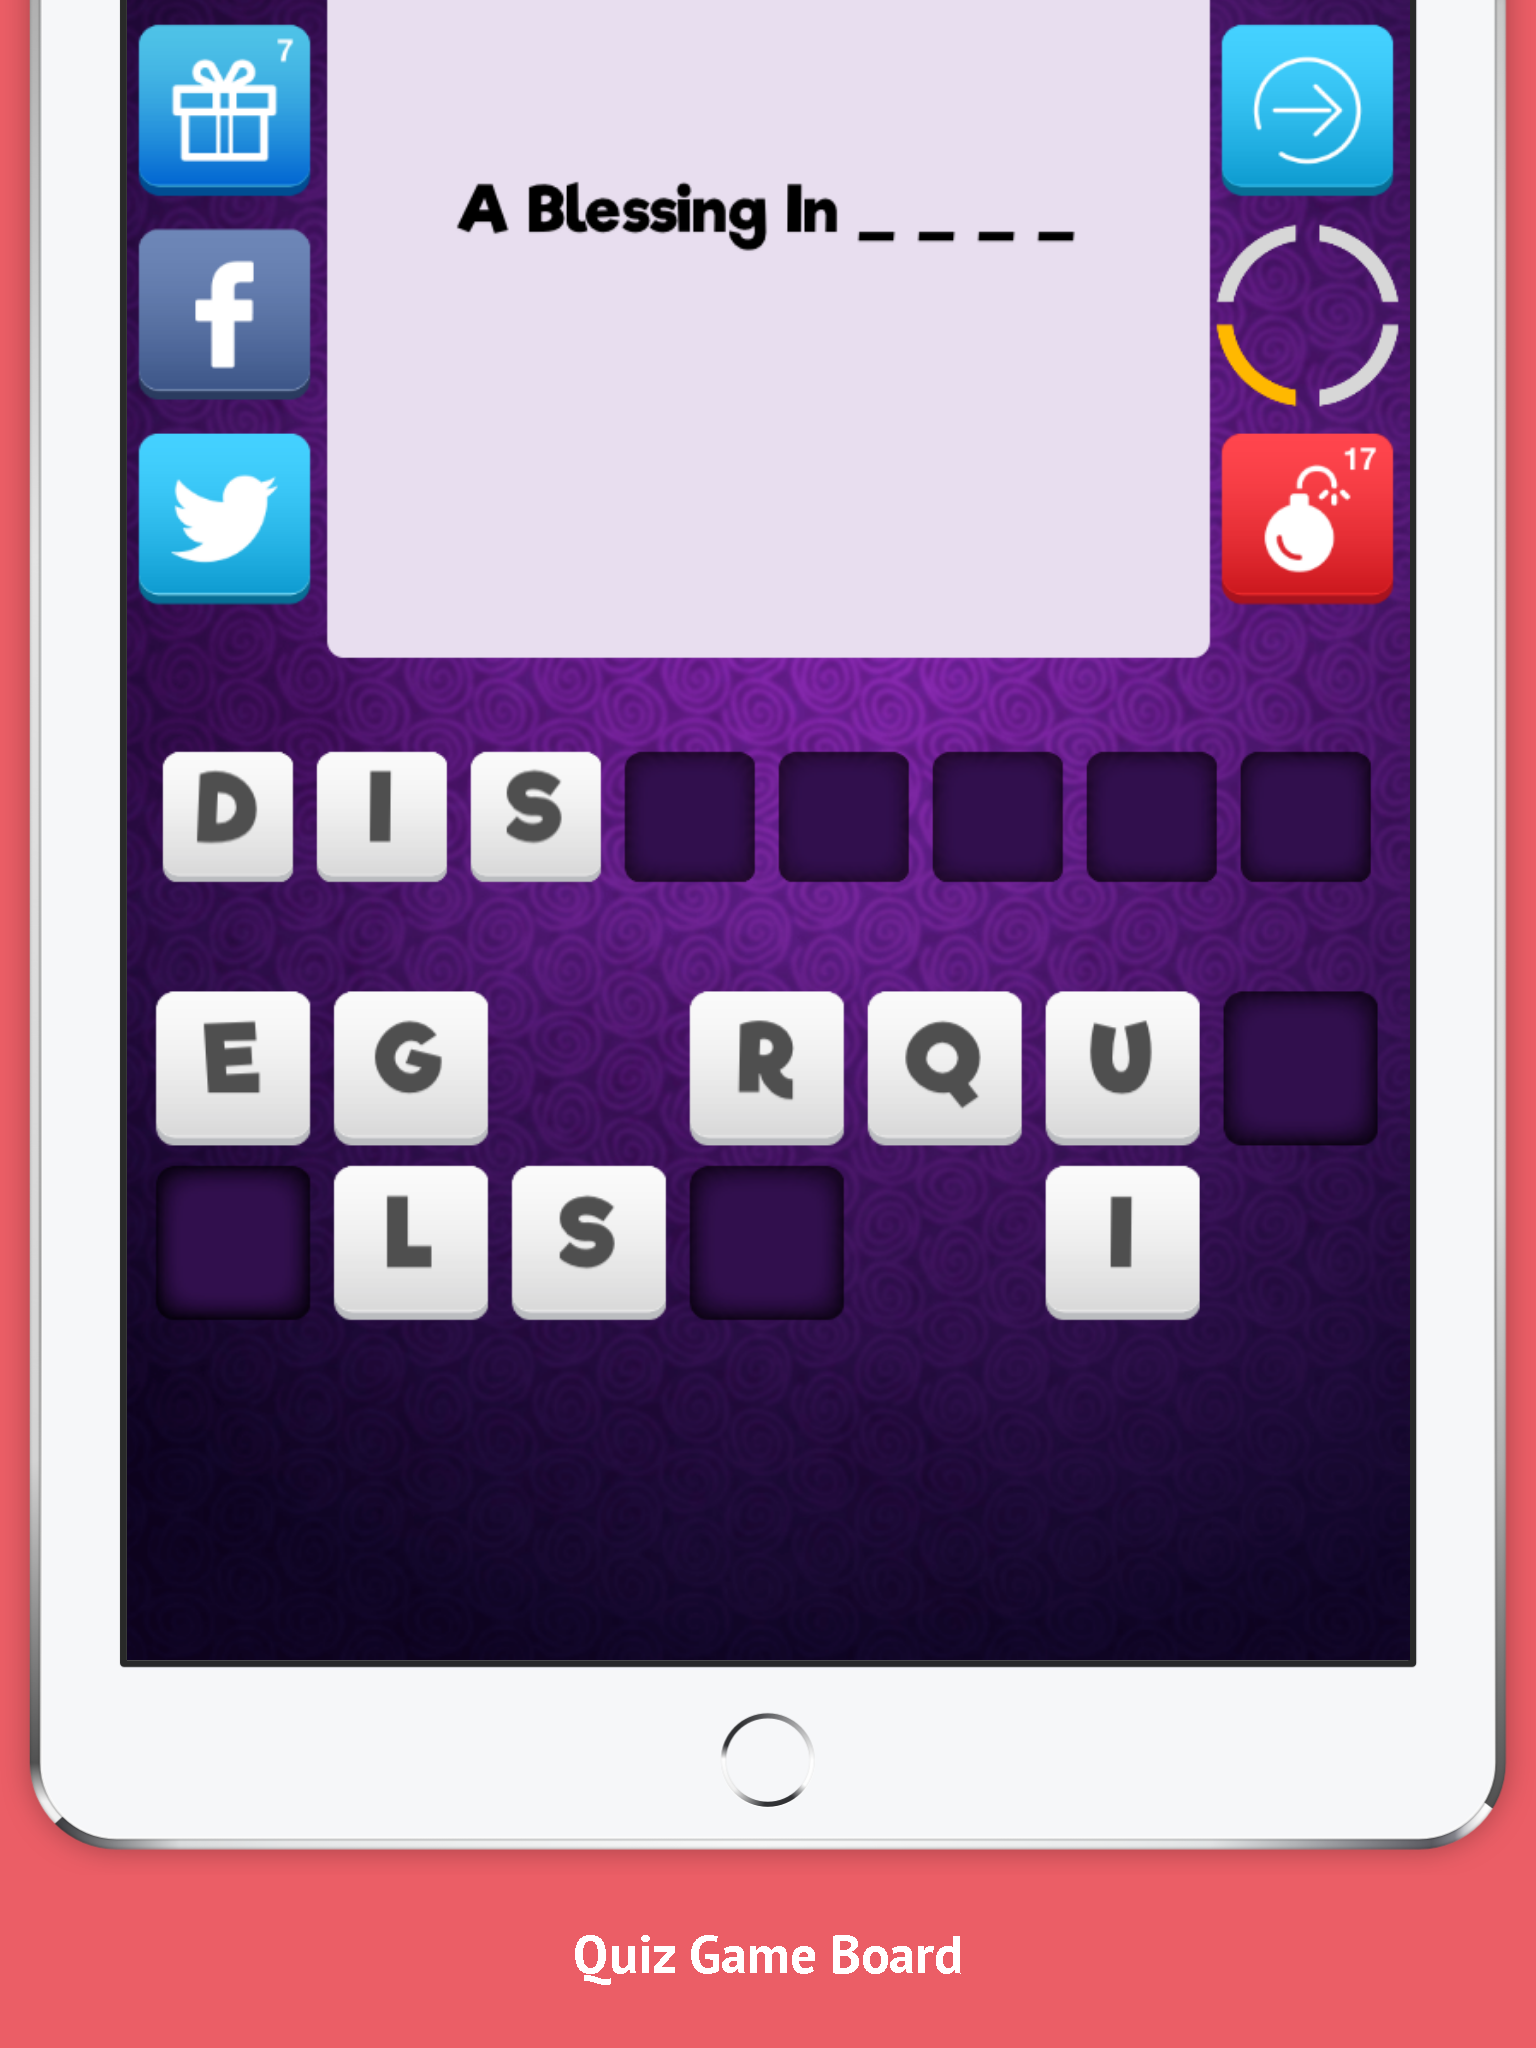 Guess the word - get the Idiom Trivia Quiz game